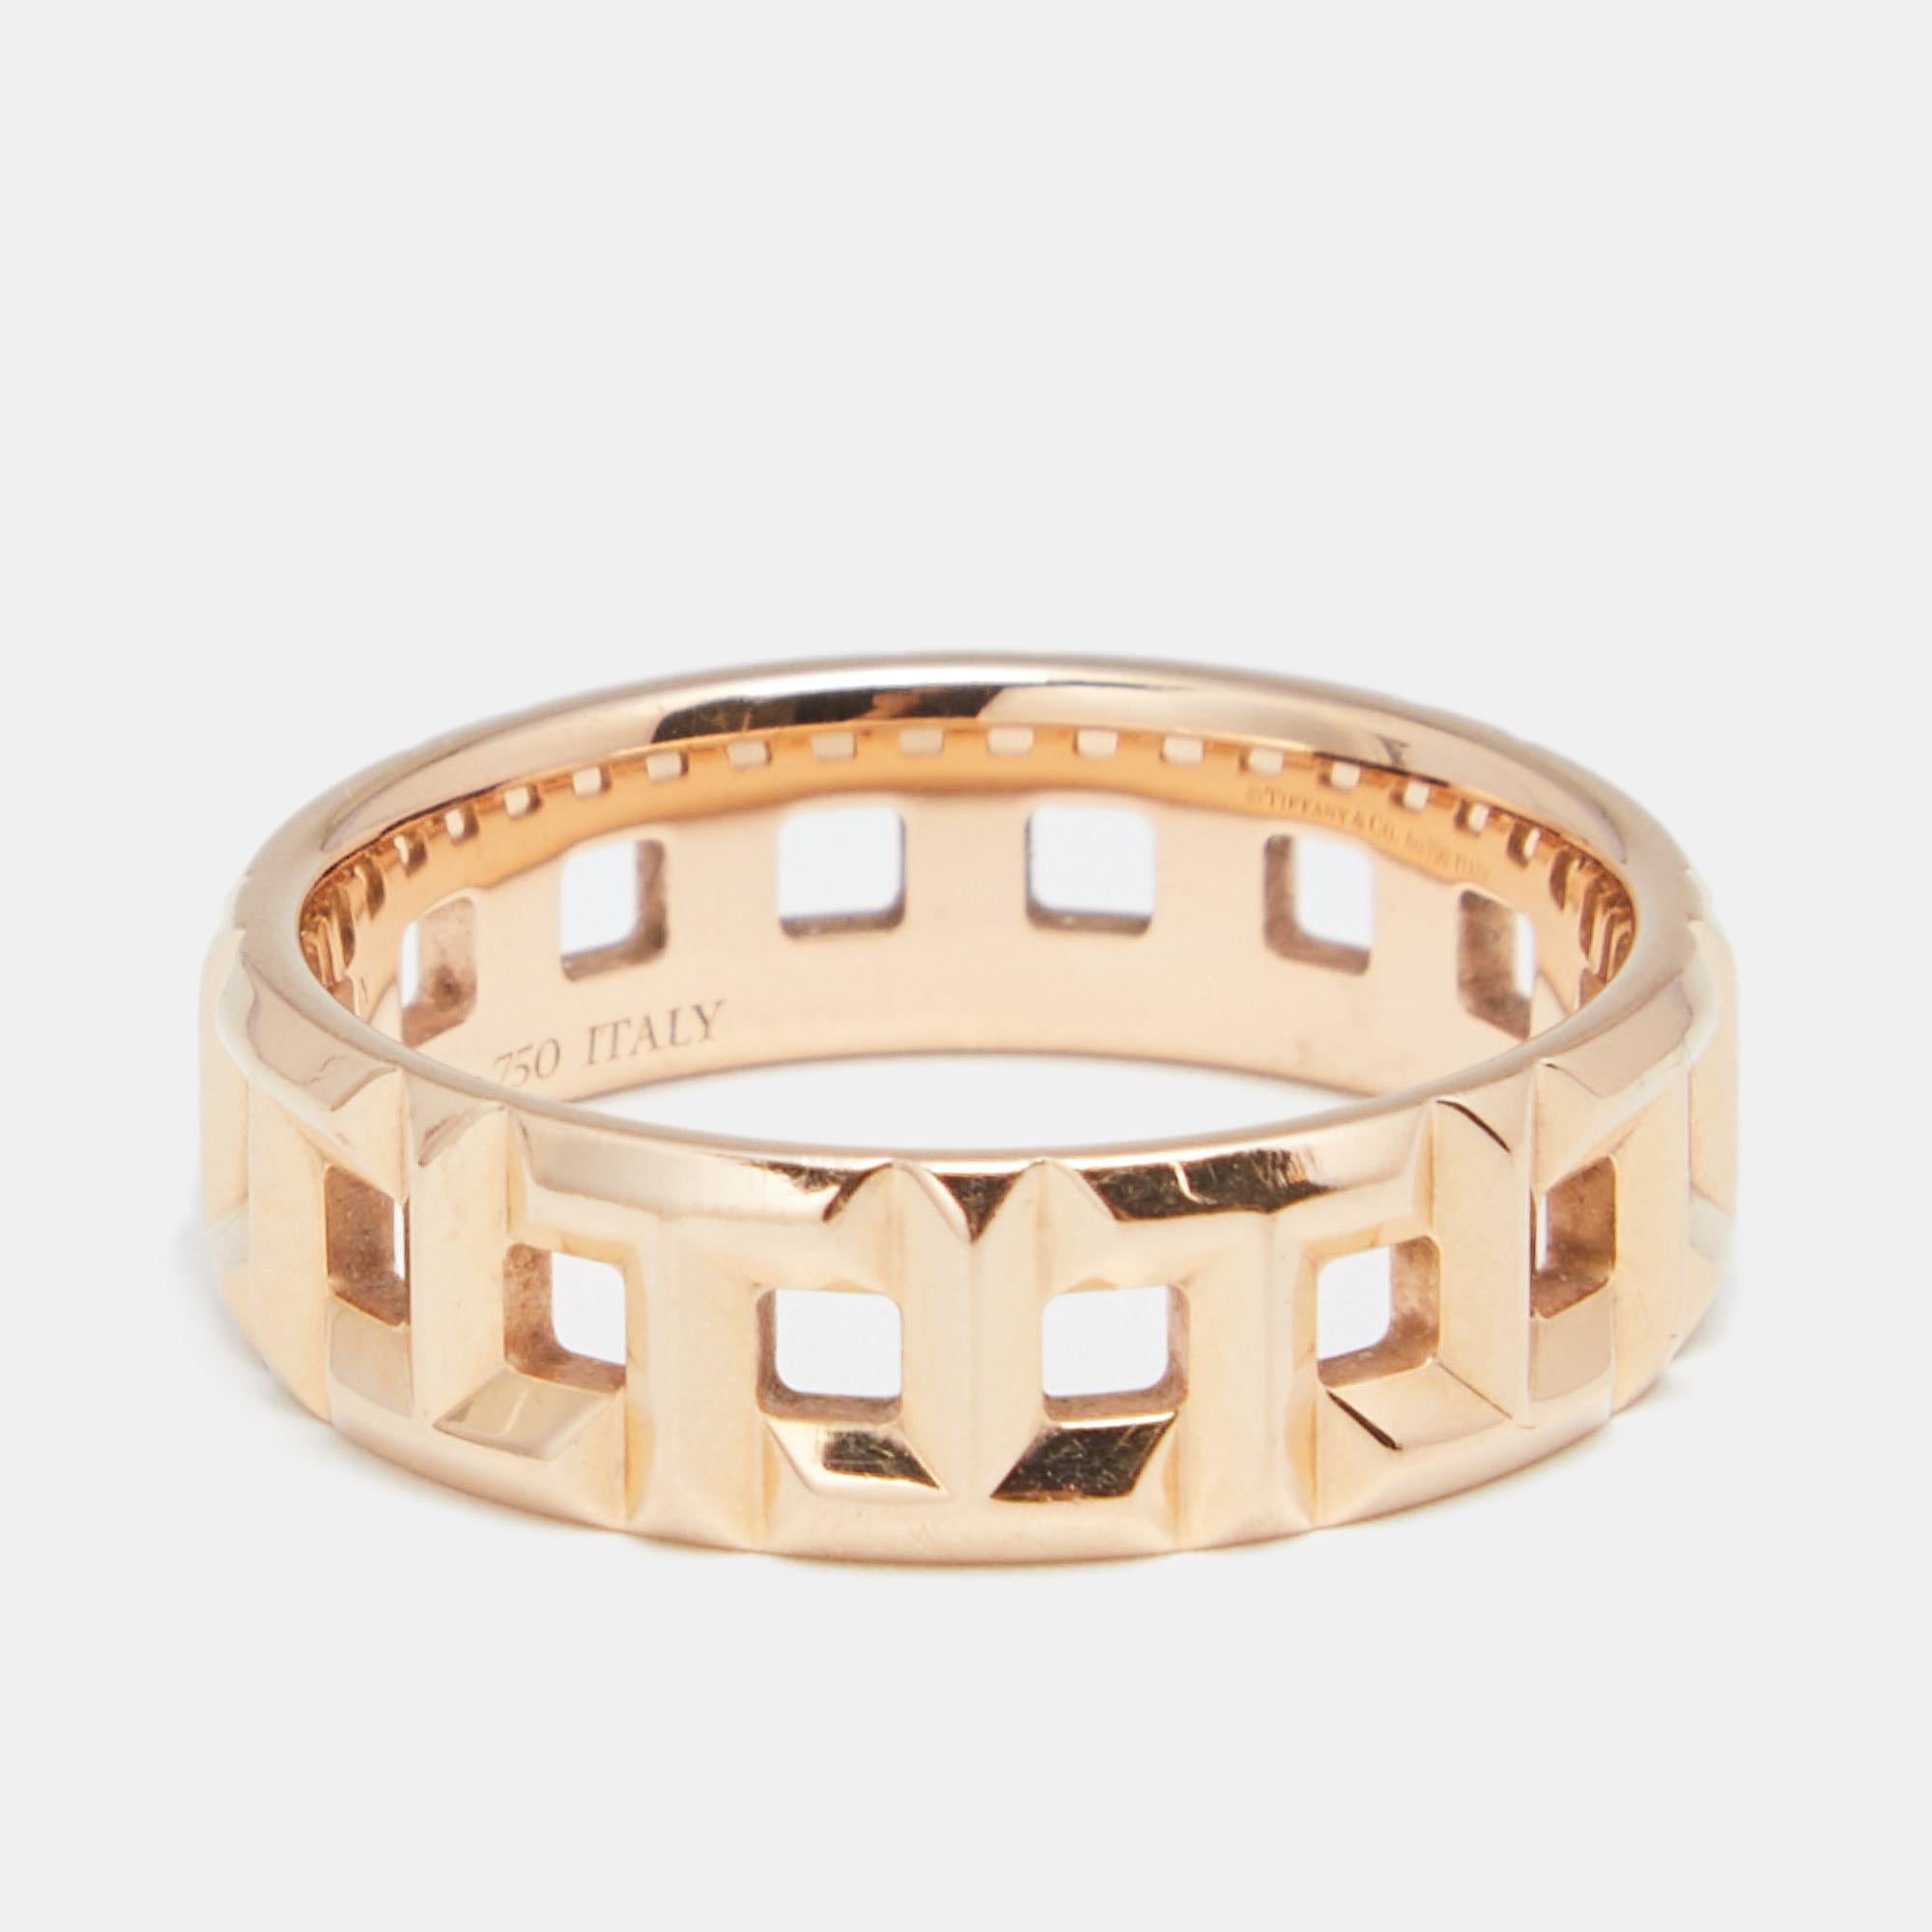 The Tiffany T collection is one of the most popular jewelry lines from Tiffany & Co. Each piece comes with a distinct shape that displays or re-interprets the 'T' symbol. This Tiffany T True wide ring is made of 18k rose gold and the design is